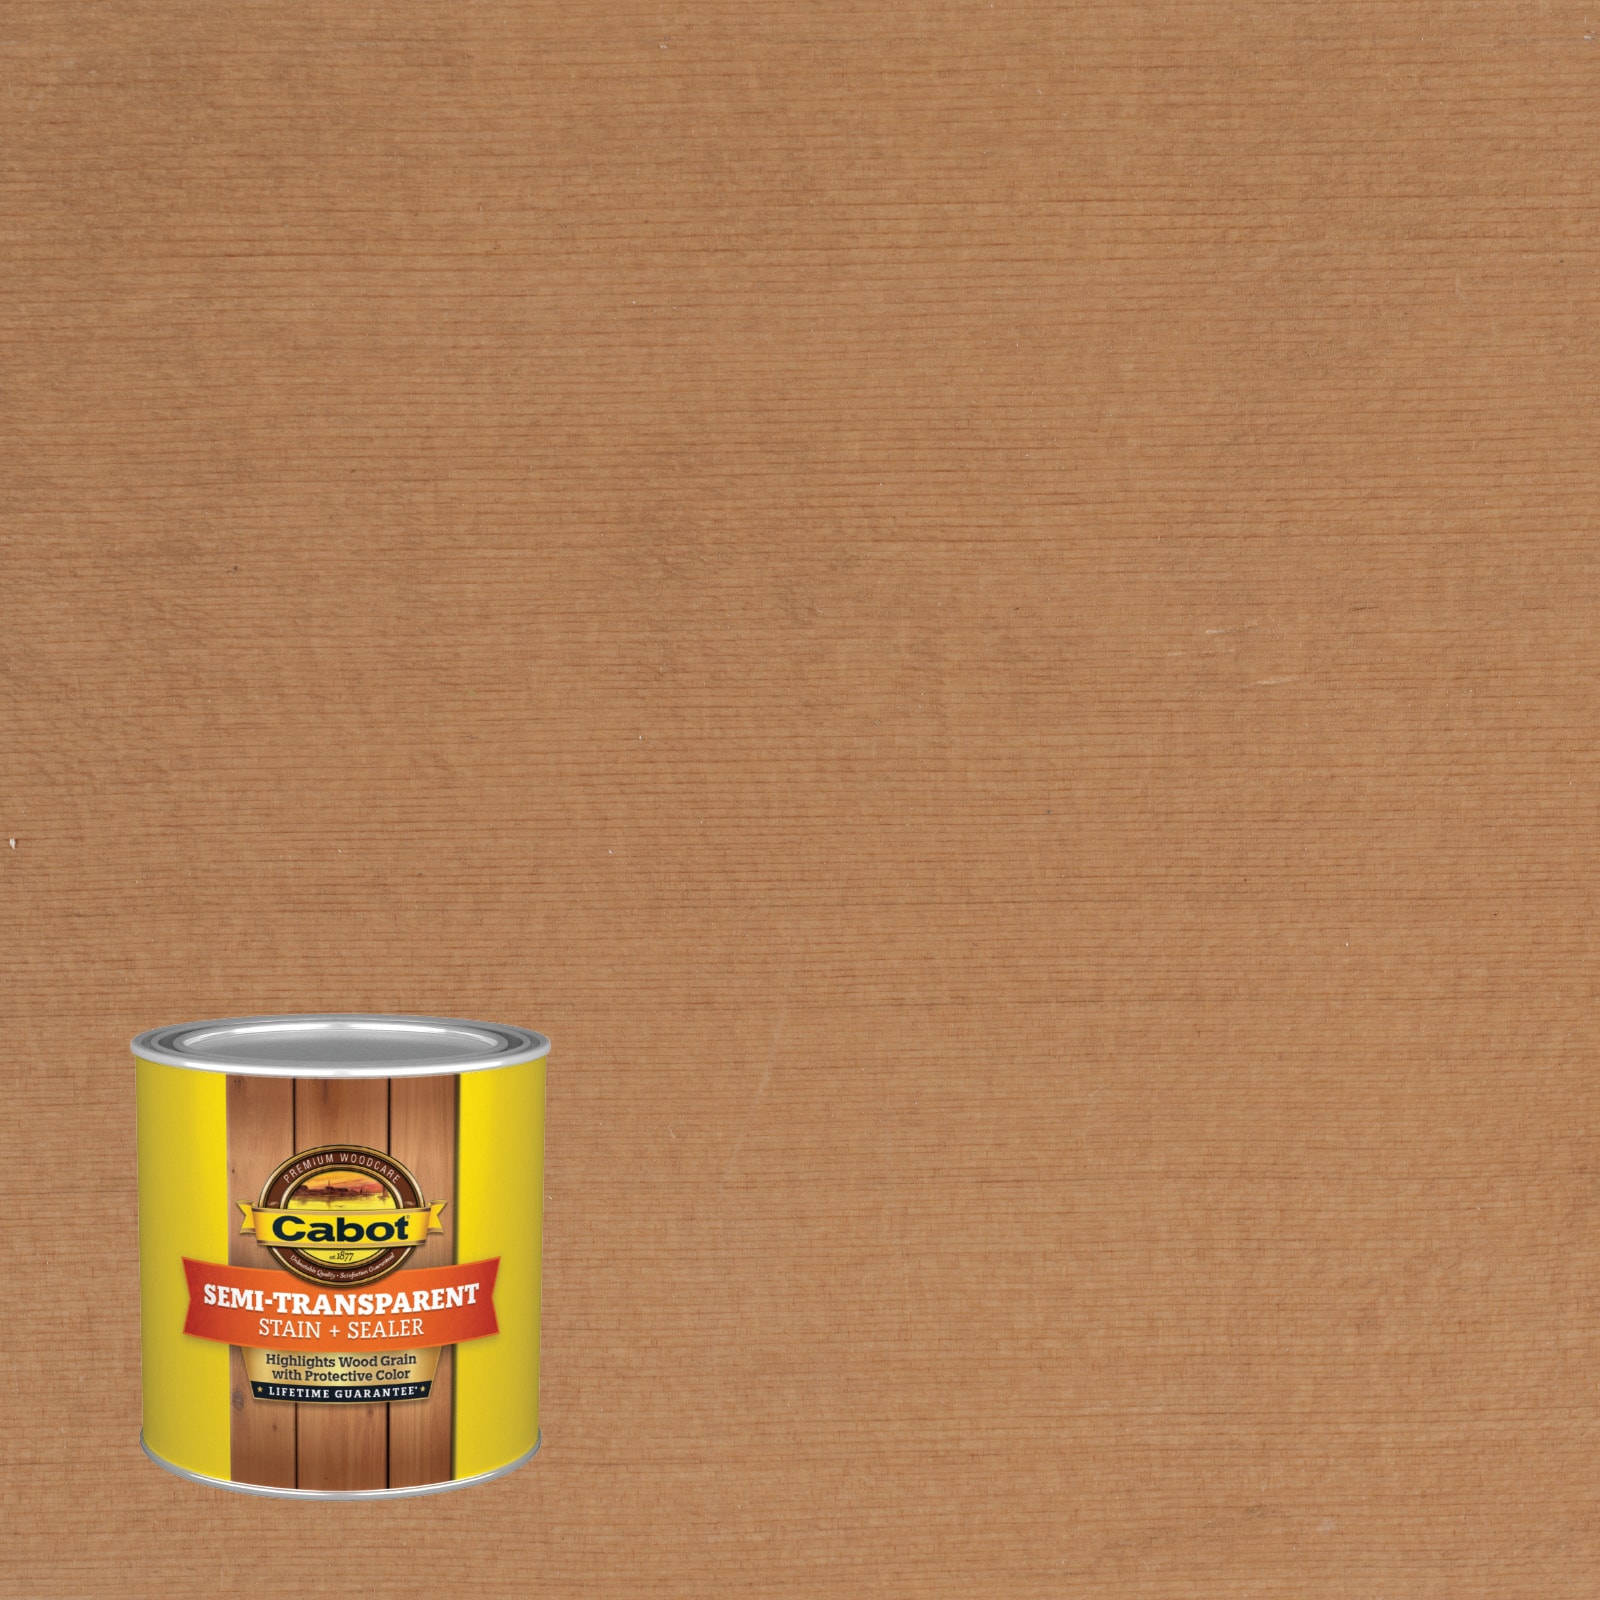 Red Cedar Semi-transparent Exterior Wood Stain and Sealer (Half-pint) in Brown | - Cabot RED CEDAR-1614376